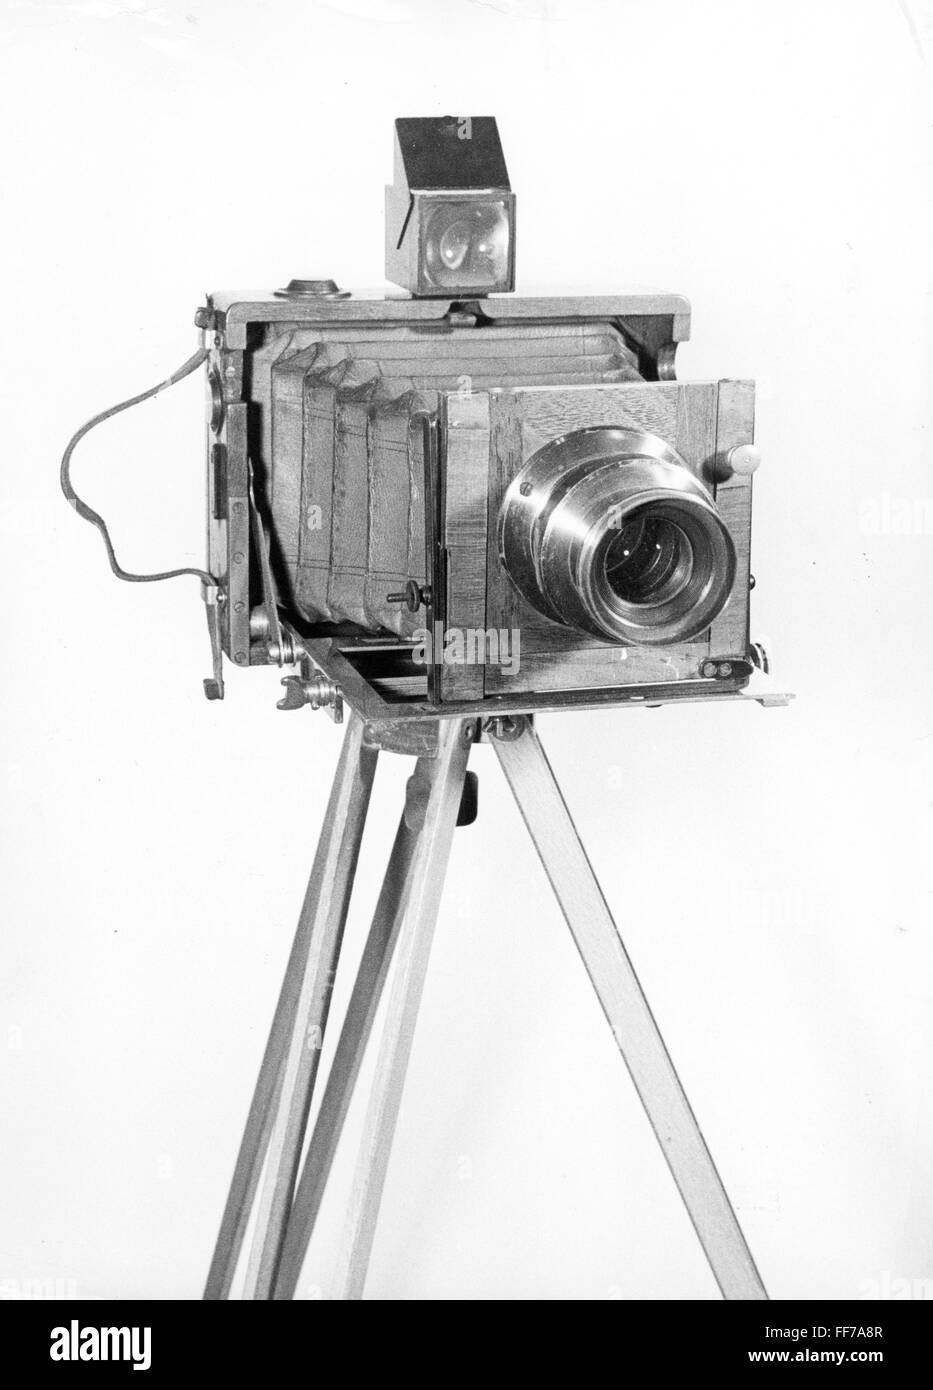 photography, cameras, view-finder camera probably by Goerting & Thielmann, Görlitz, 19th century, photographic collection, municipal museum, Munich, 19th century, object, objects, stills, objective, objectives, lens, lenses, tripod, tripods, photo camera, finder, view-finder, viewfinder, cameras, camera, historic, historical, Goerlitz, Görlitz, Gorlitz, Additional-Rights-Clearences-Not Available Stock Photo